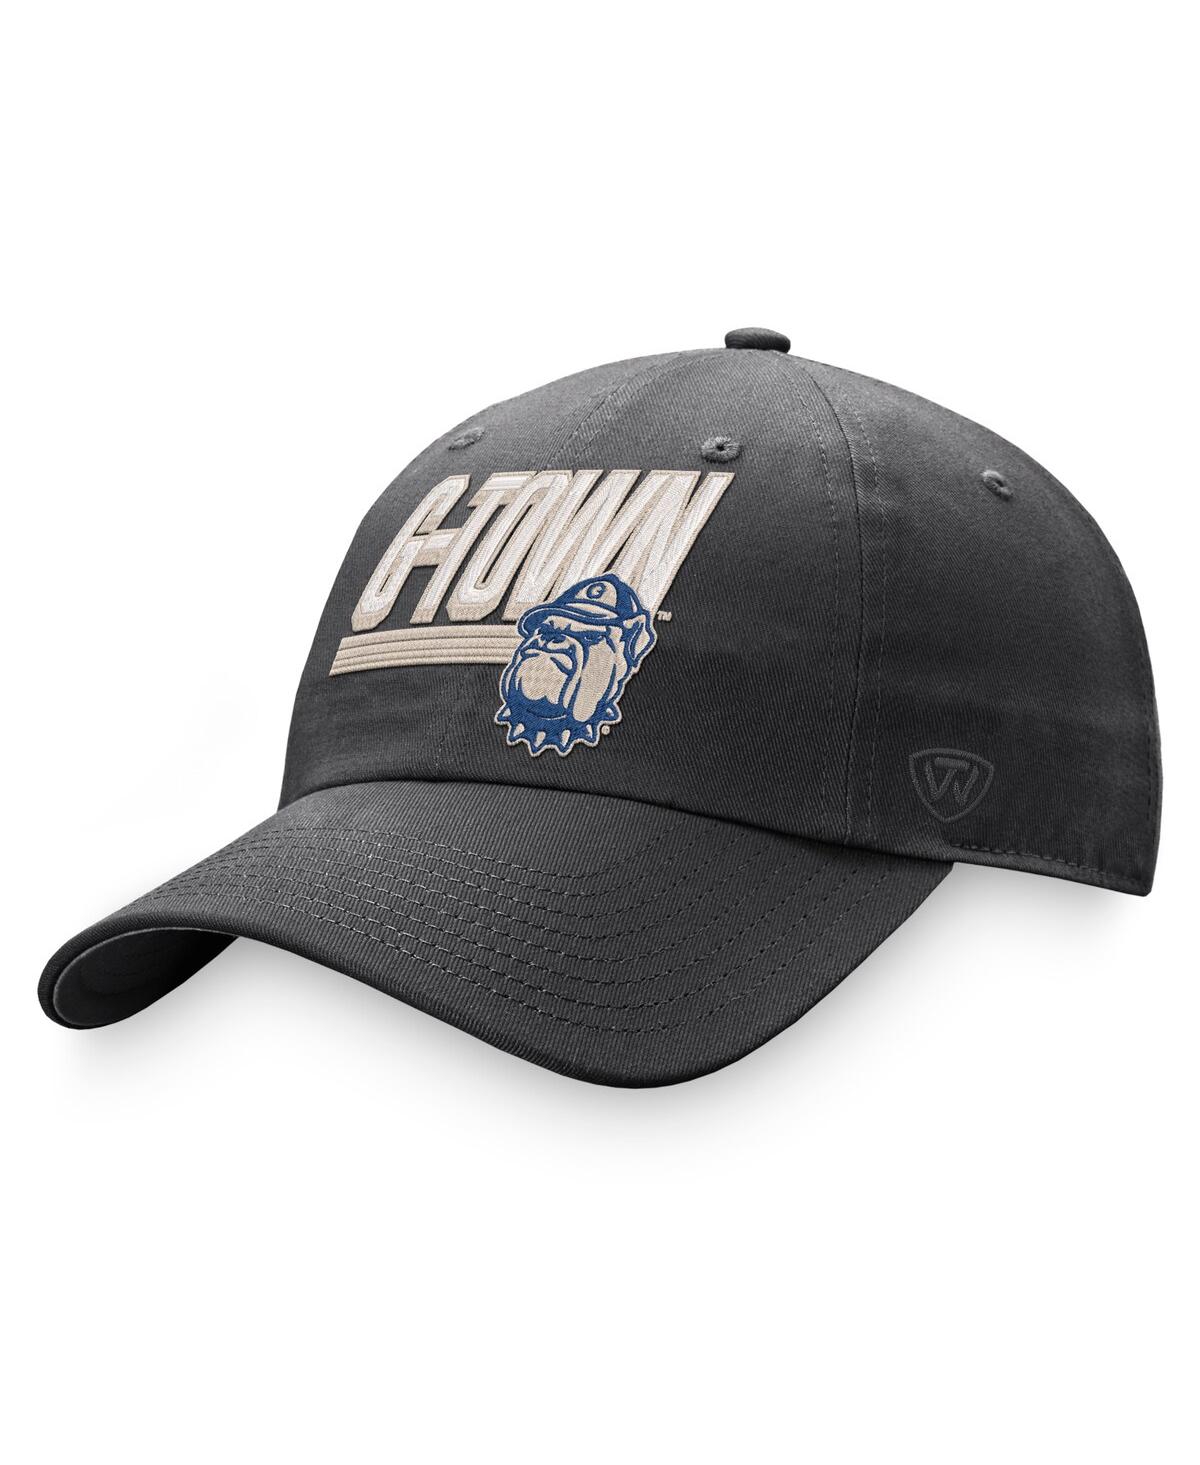 Men's Top of the World Charcoal Georgetown Hoyas Slice Adjustable Hat - Charcoal